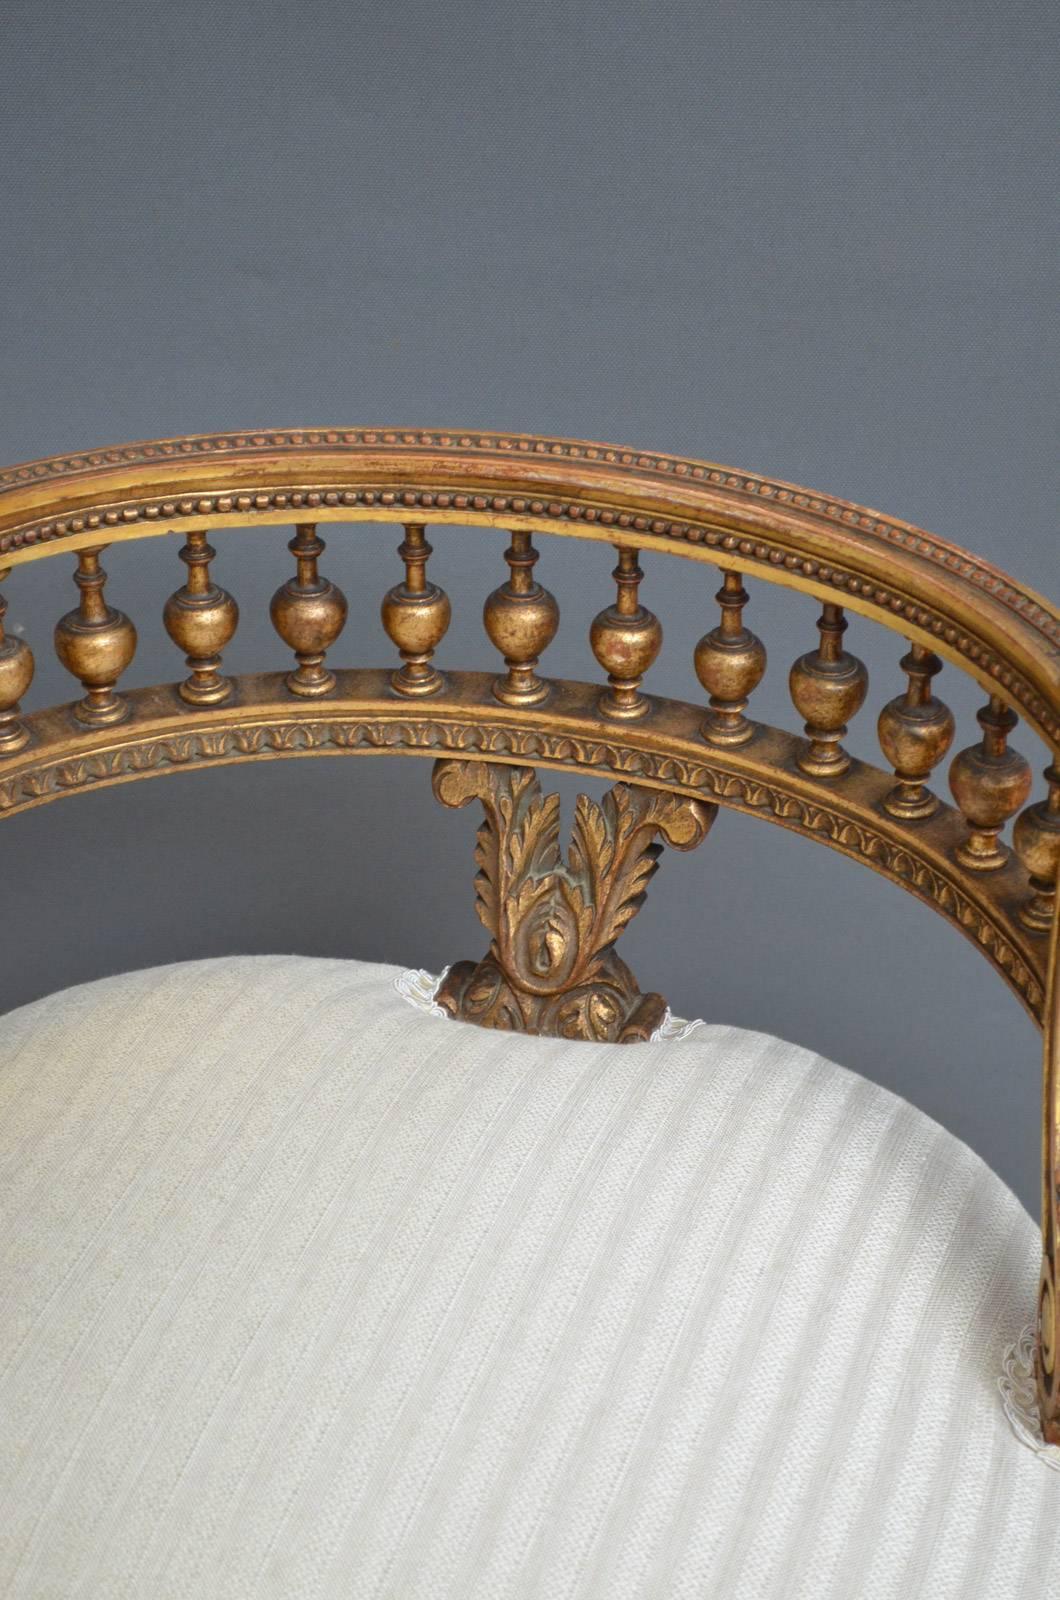 Sn4029 Turn of the century giltwood bedroom chair with low back rails, bulbous spindles and leaf carved arms, newly recovered seat and turned reeded legs. This chairs is in fantastic original condition, circa 1900
Measures: H 17, H 24.5?, W 20?, D